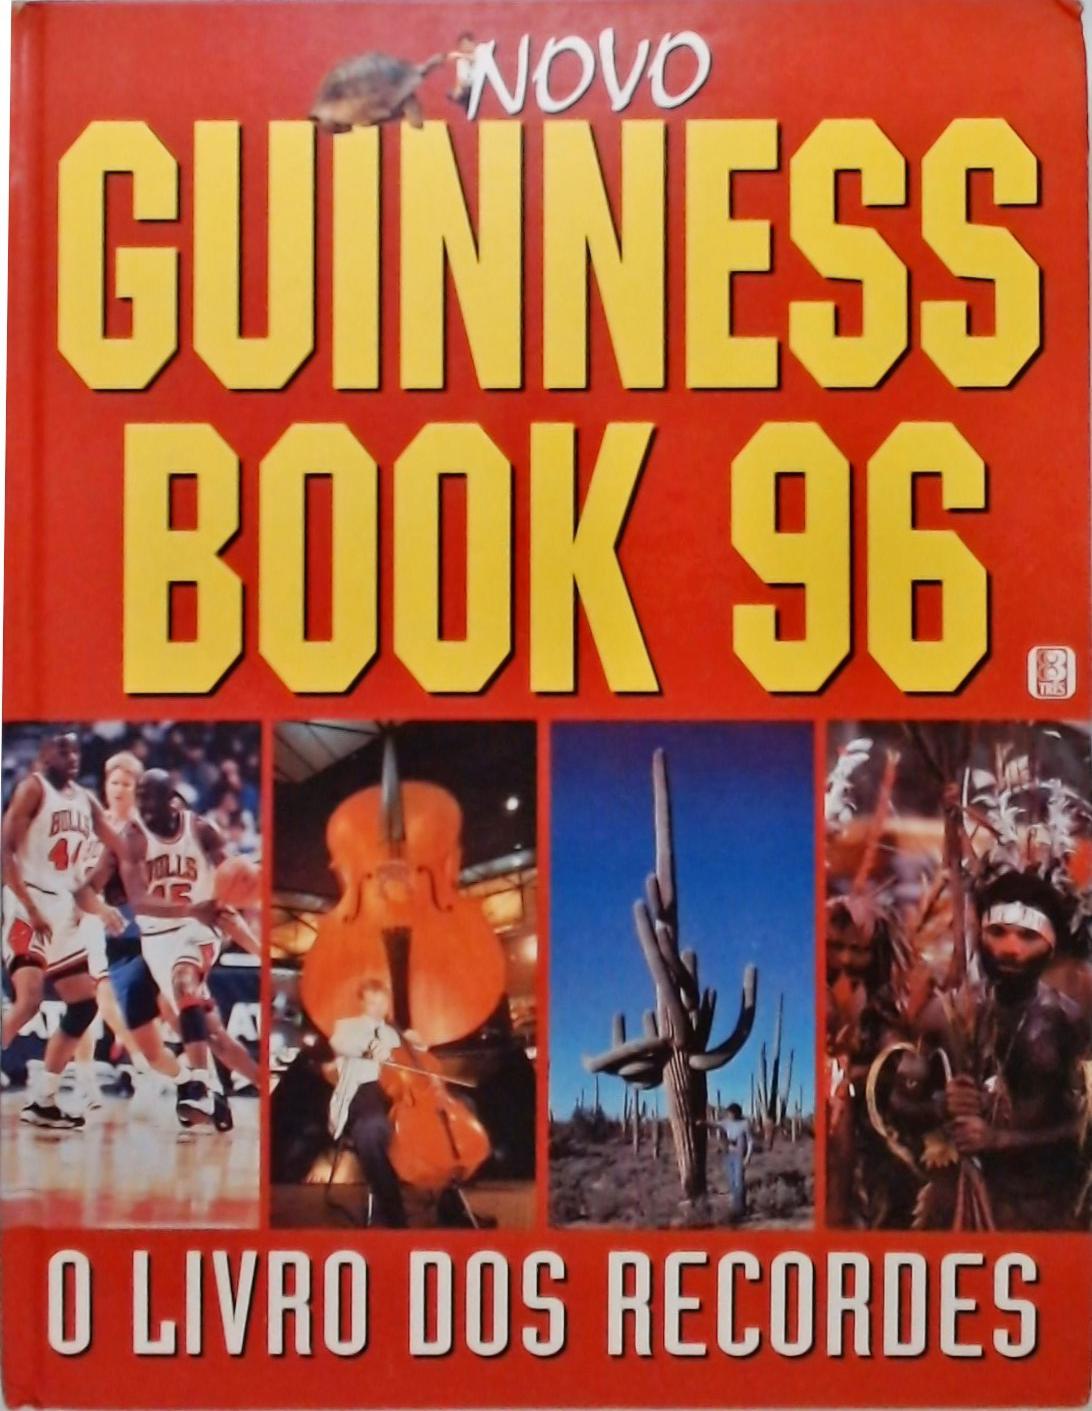 Guiness Book 96